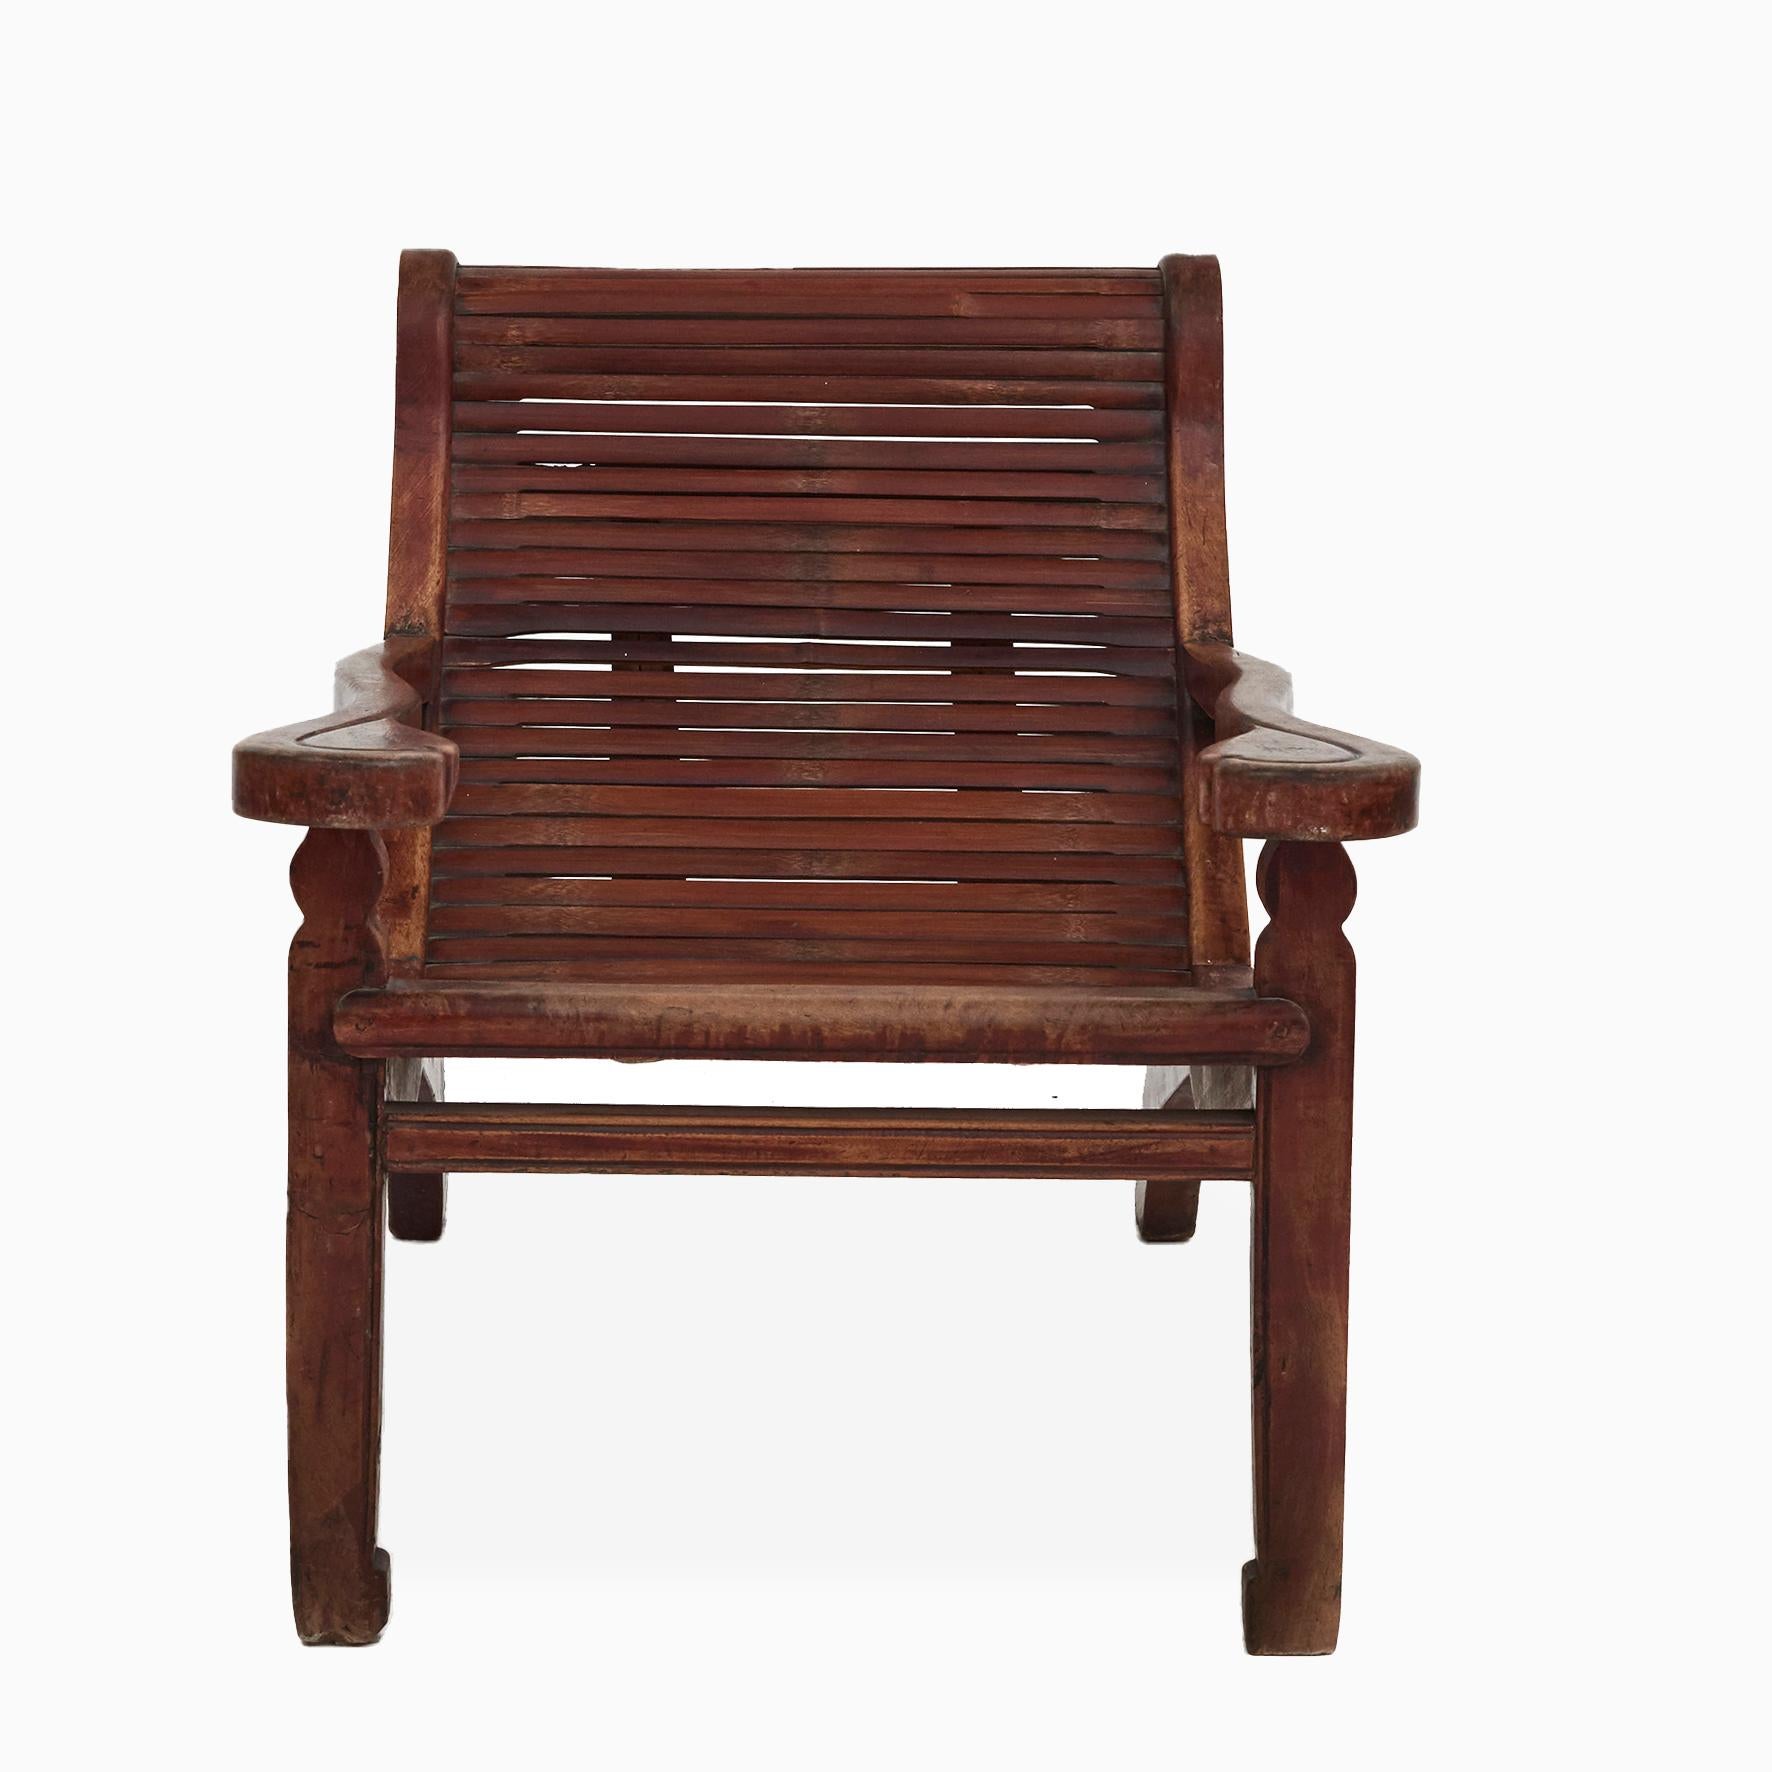 An antique Chinese reclining plantation lounge chair. Features a nicely curving body made of linden wood with bamboo slats.
China 1860-1880.
Materiale: Linden wood (basswood / lime tree) Bamboo
In original condition with a nice patina.